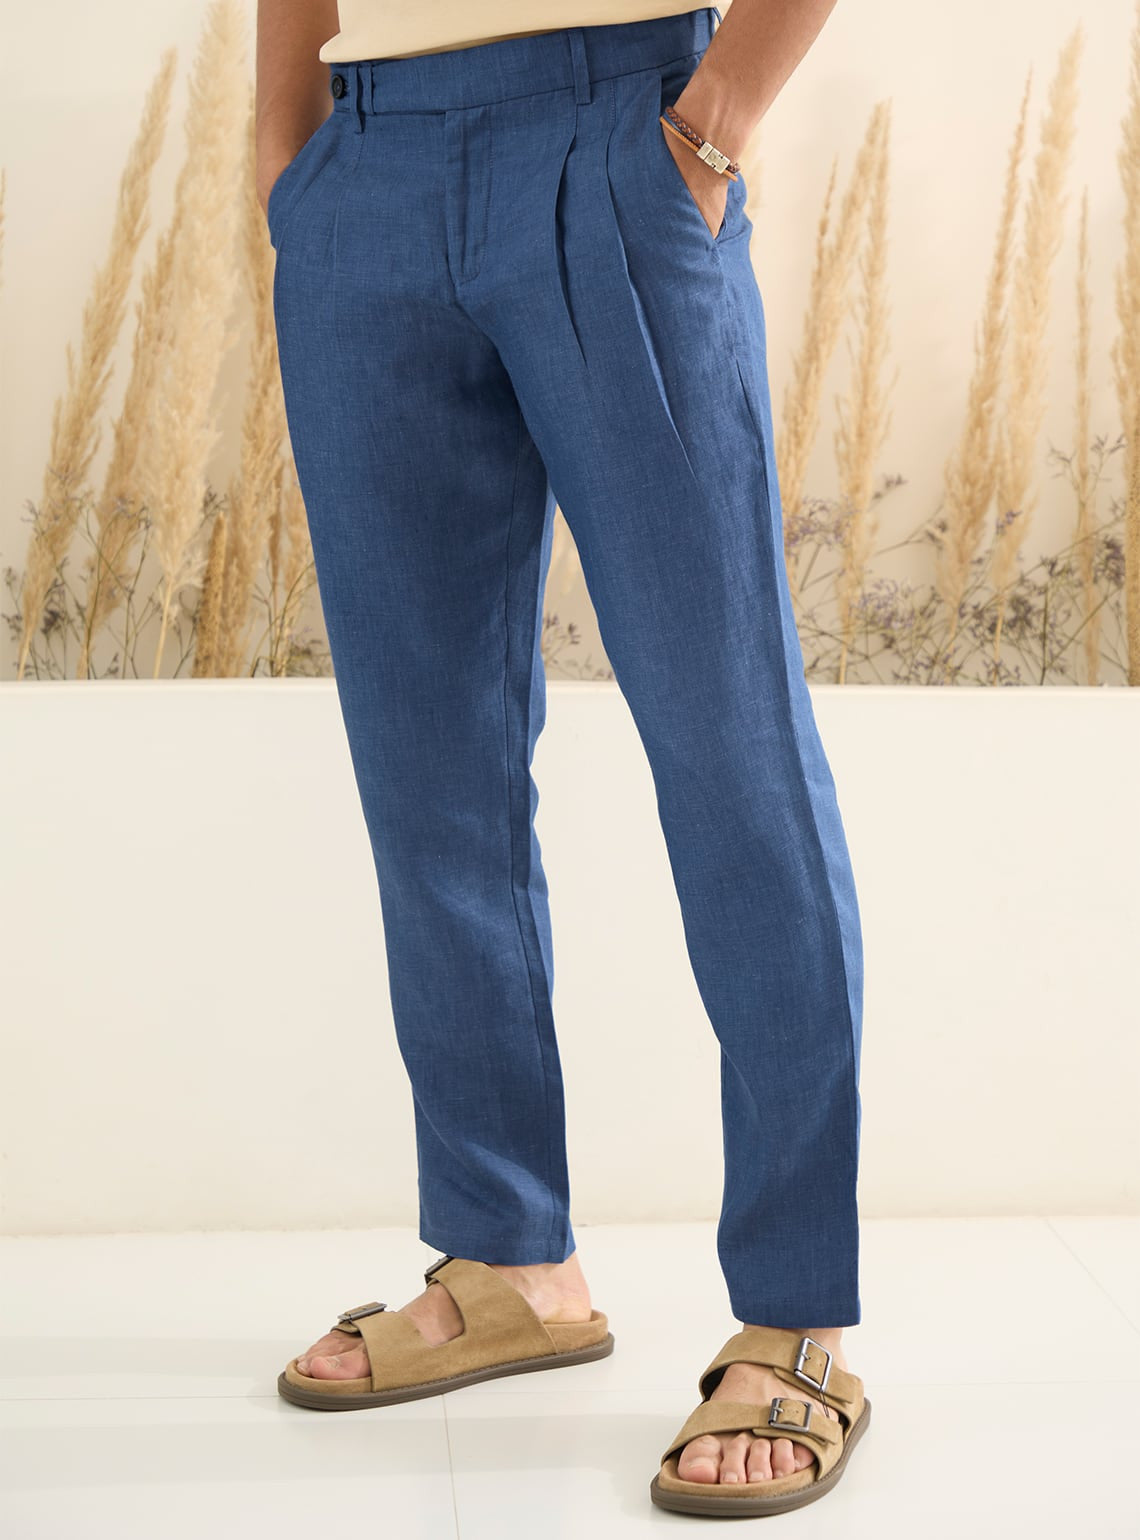 SKY BLUE LINEN PANT RELAXED TAPERED FIT  ROOKIES